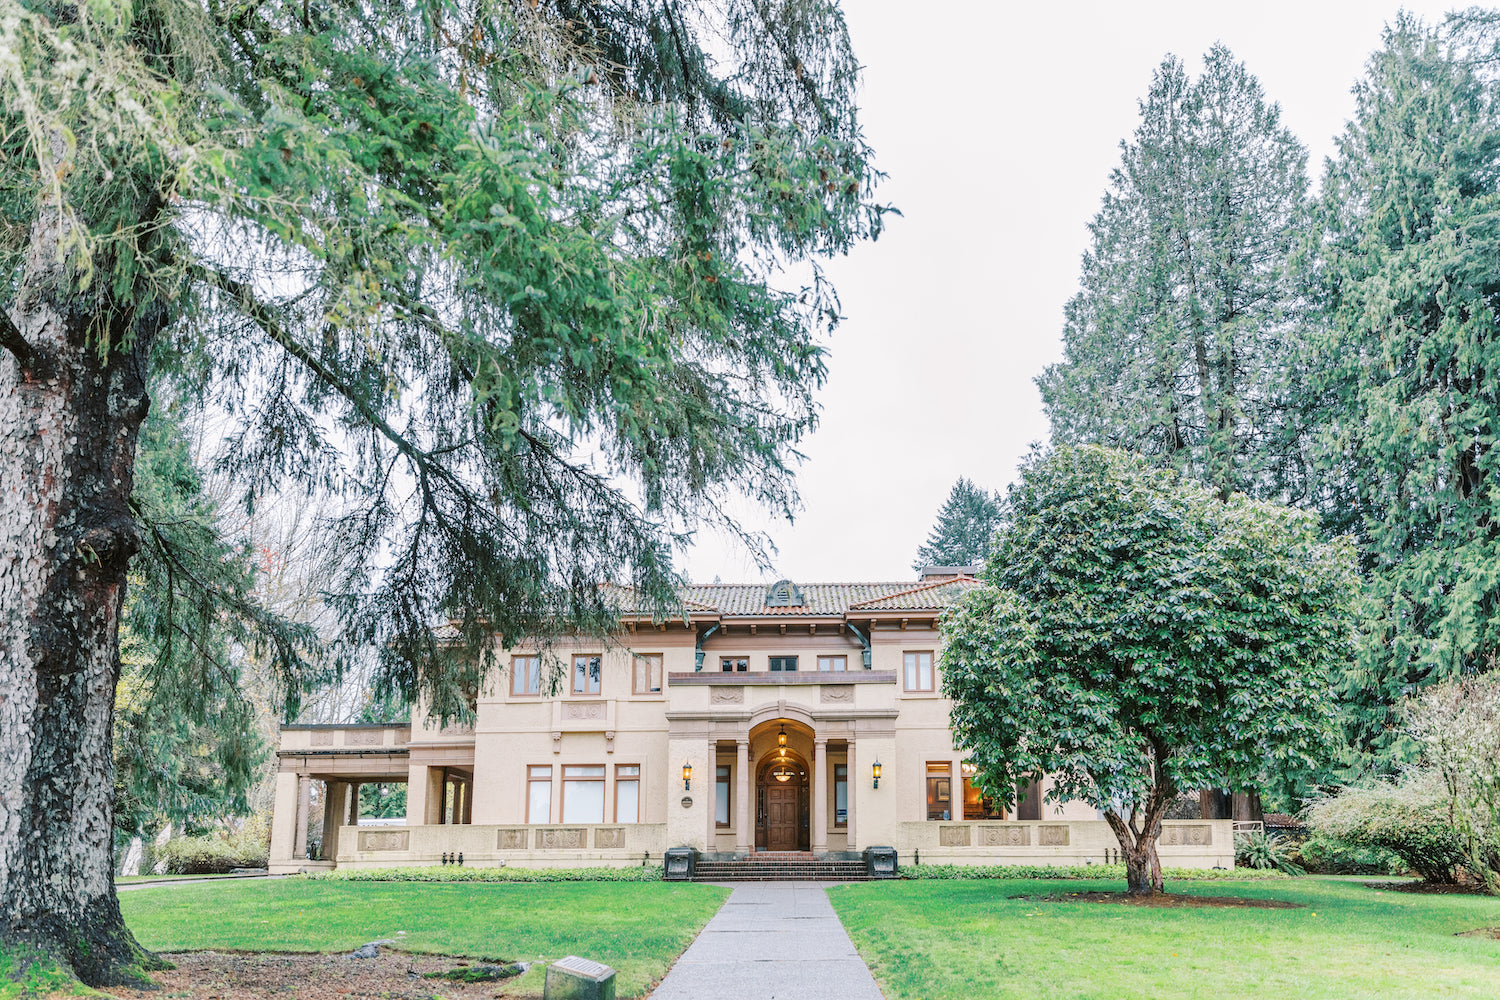 Lord Mansion party and wedding venue Olympia Washington